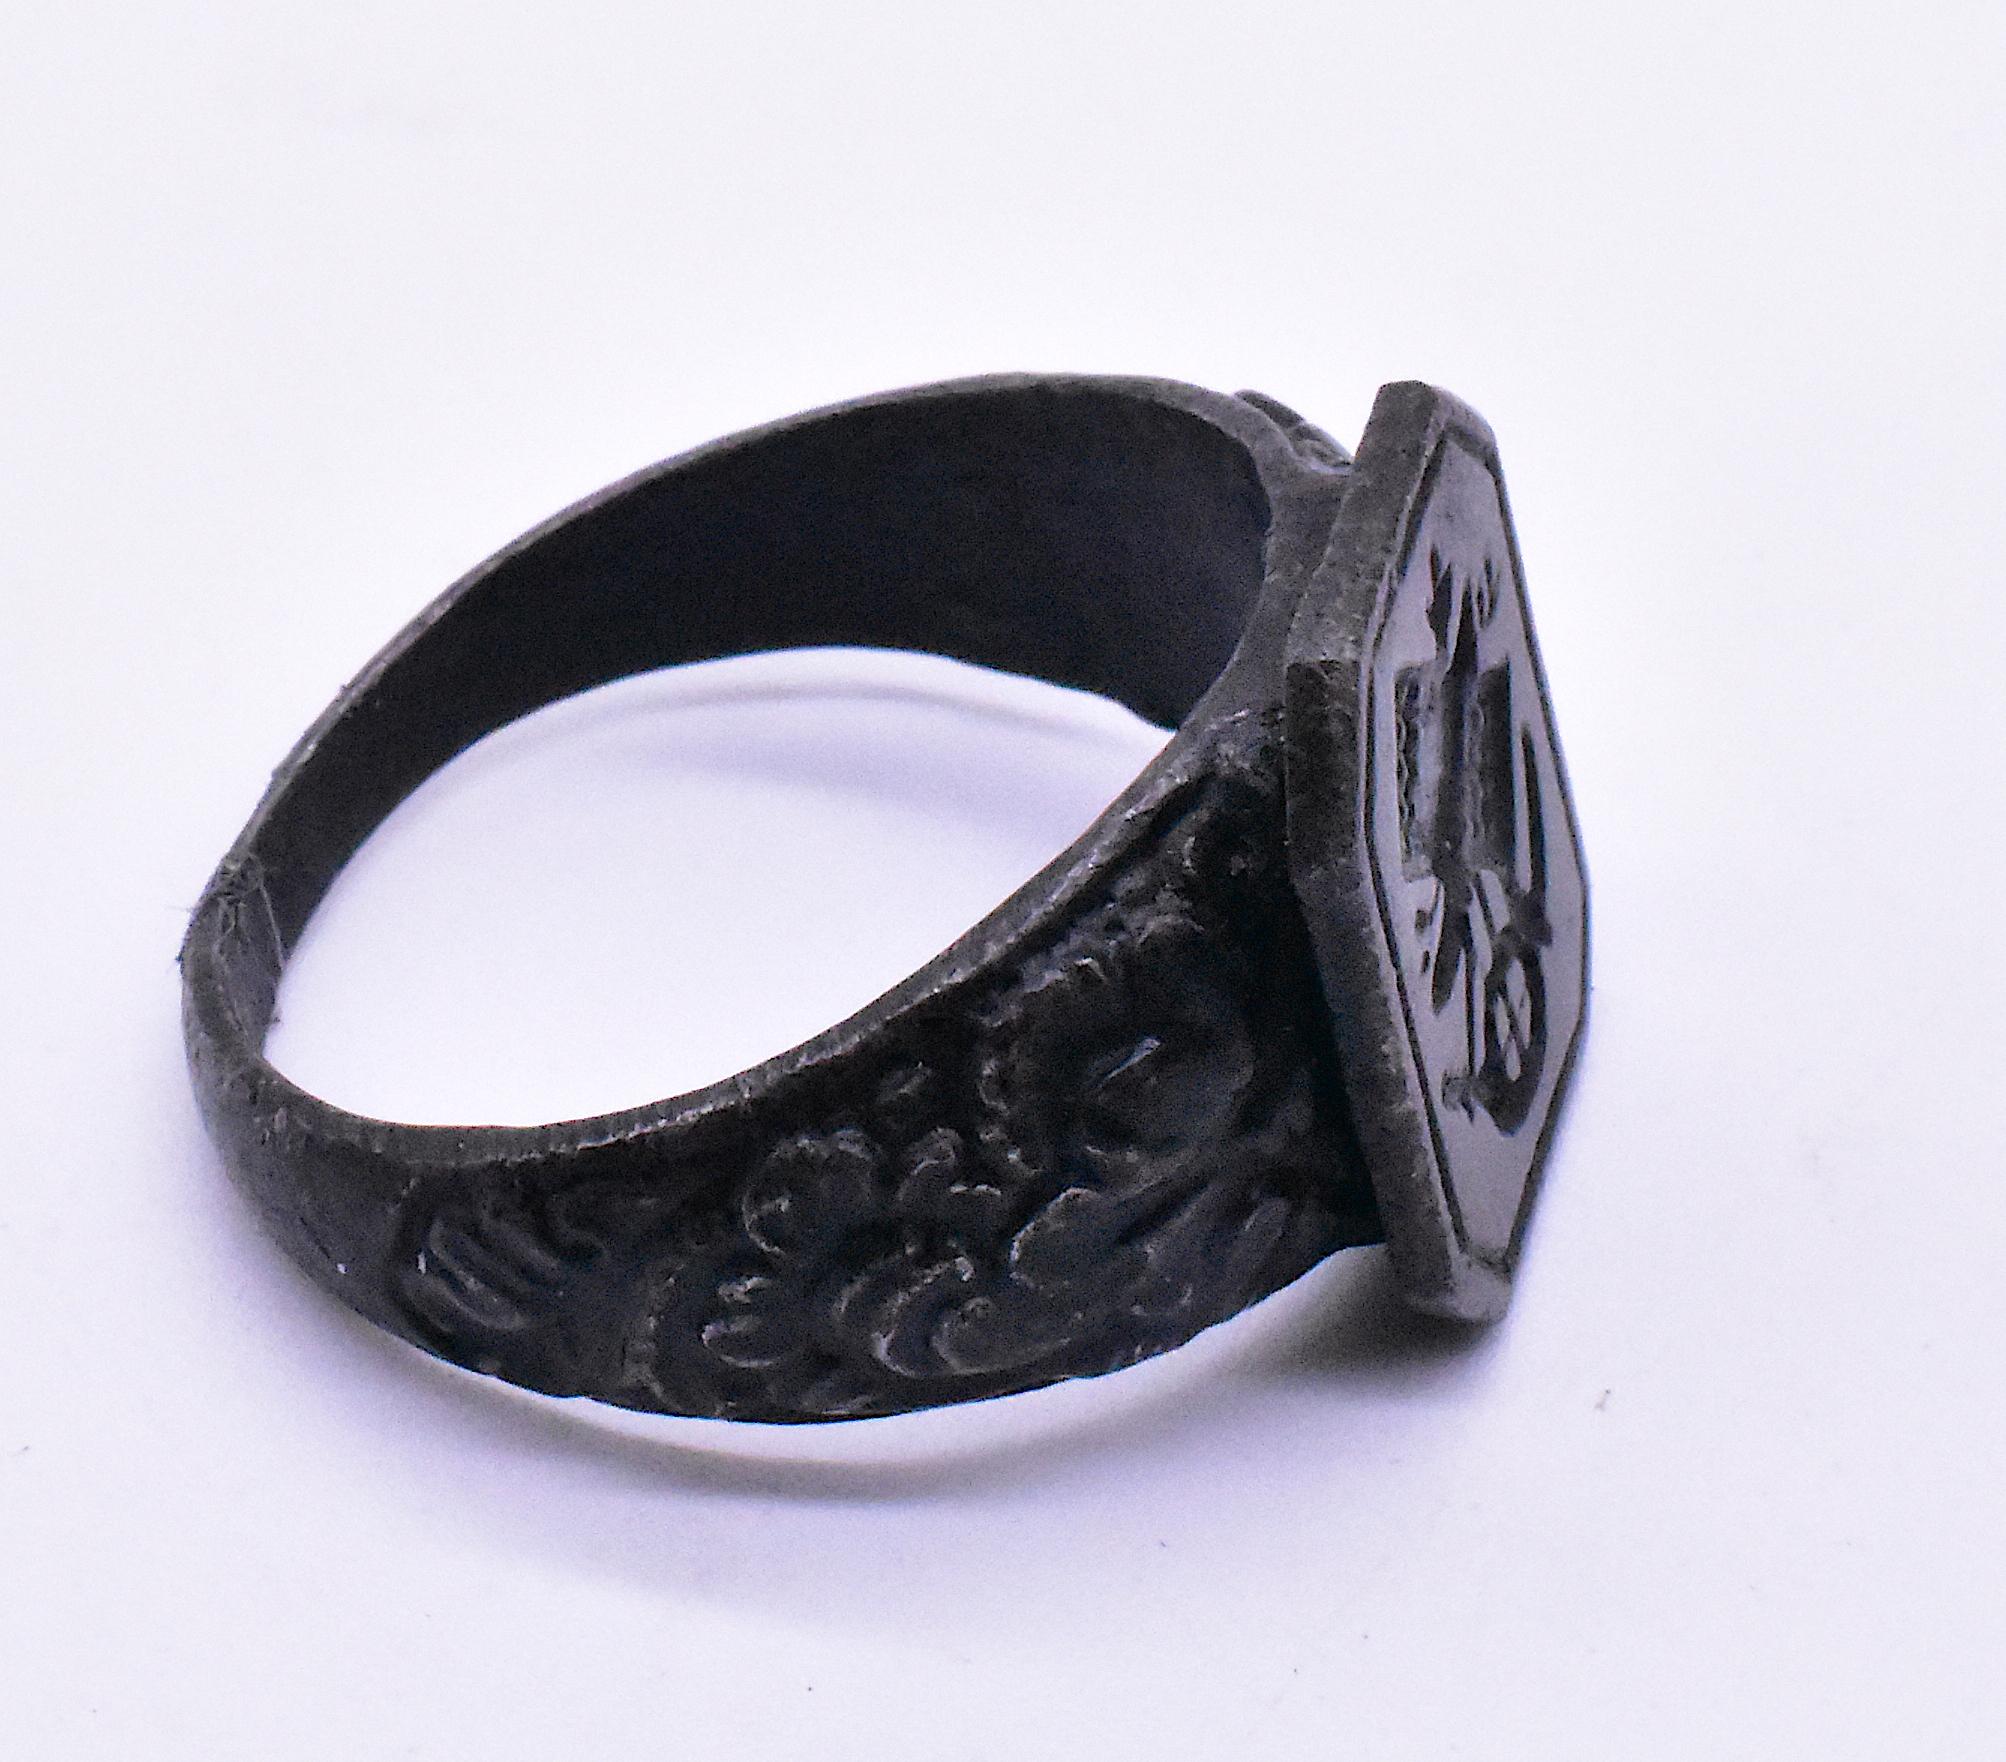 This is a wonderful signet ring made of Berlin iron and carved with what appears to be agricultural tools, including a scythe, wisps of grain from a harvest, and what appears to be a symbol for a parcel of agricultural land. The scythe symbolizes